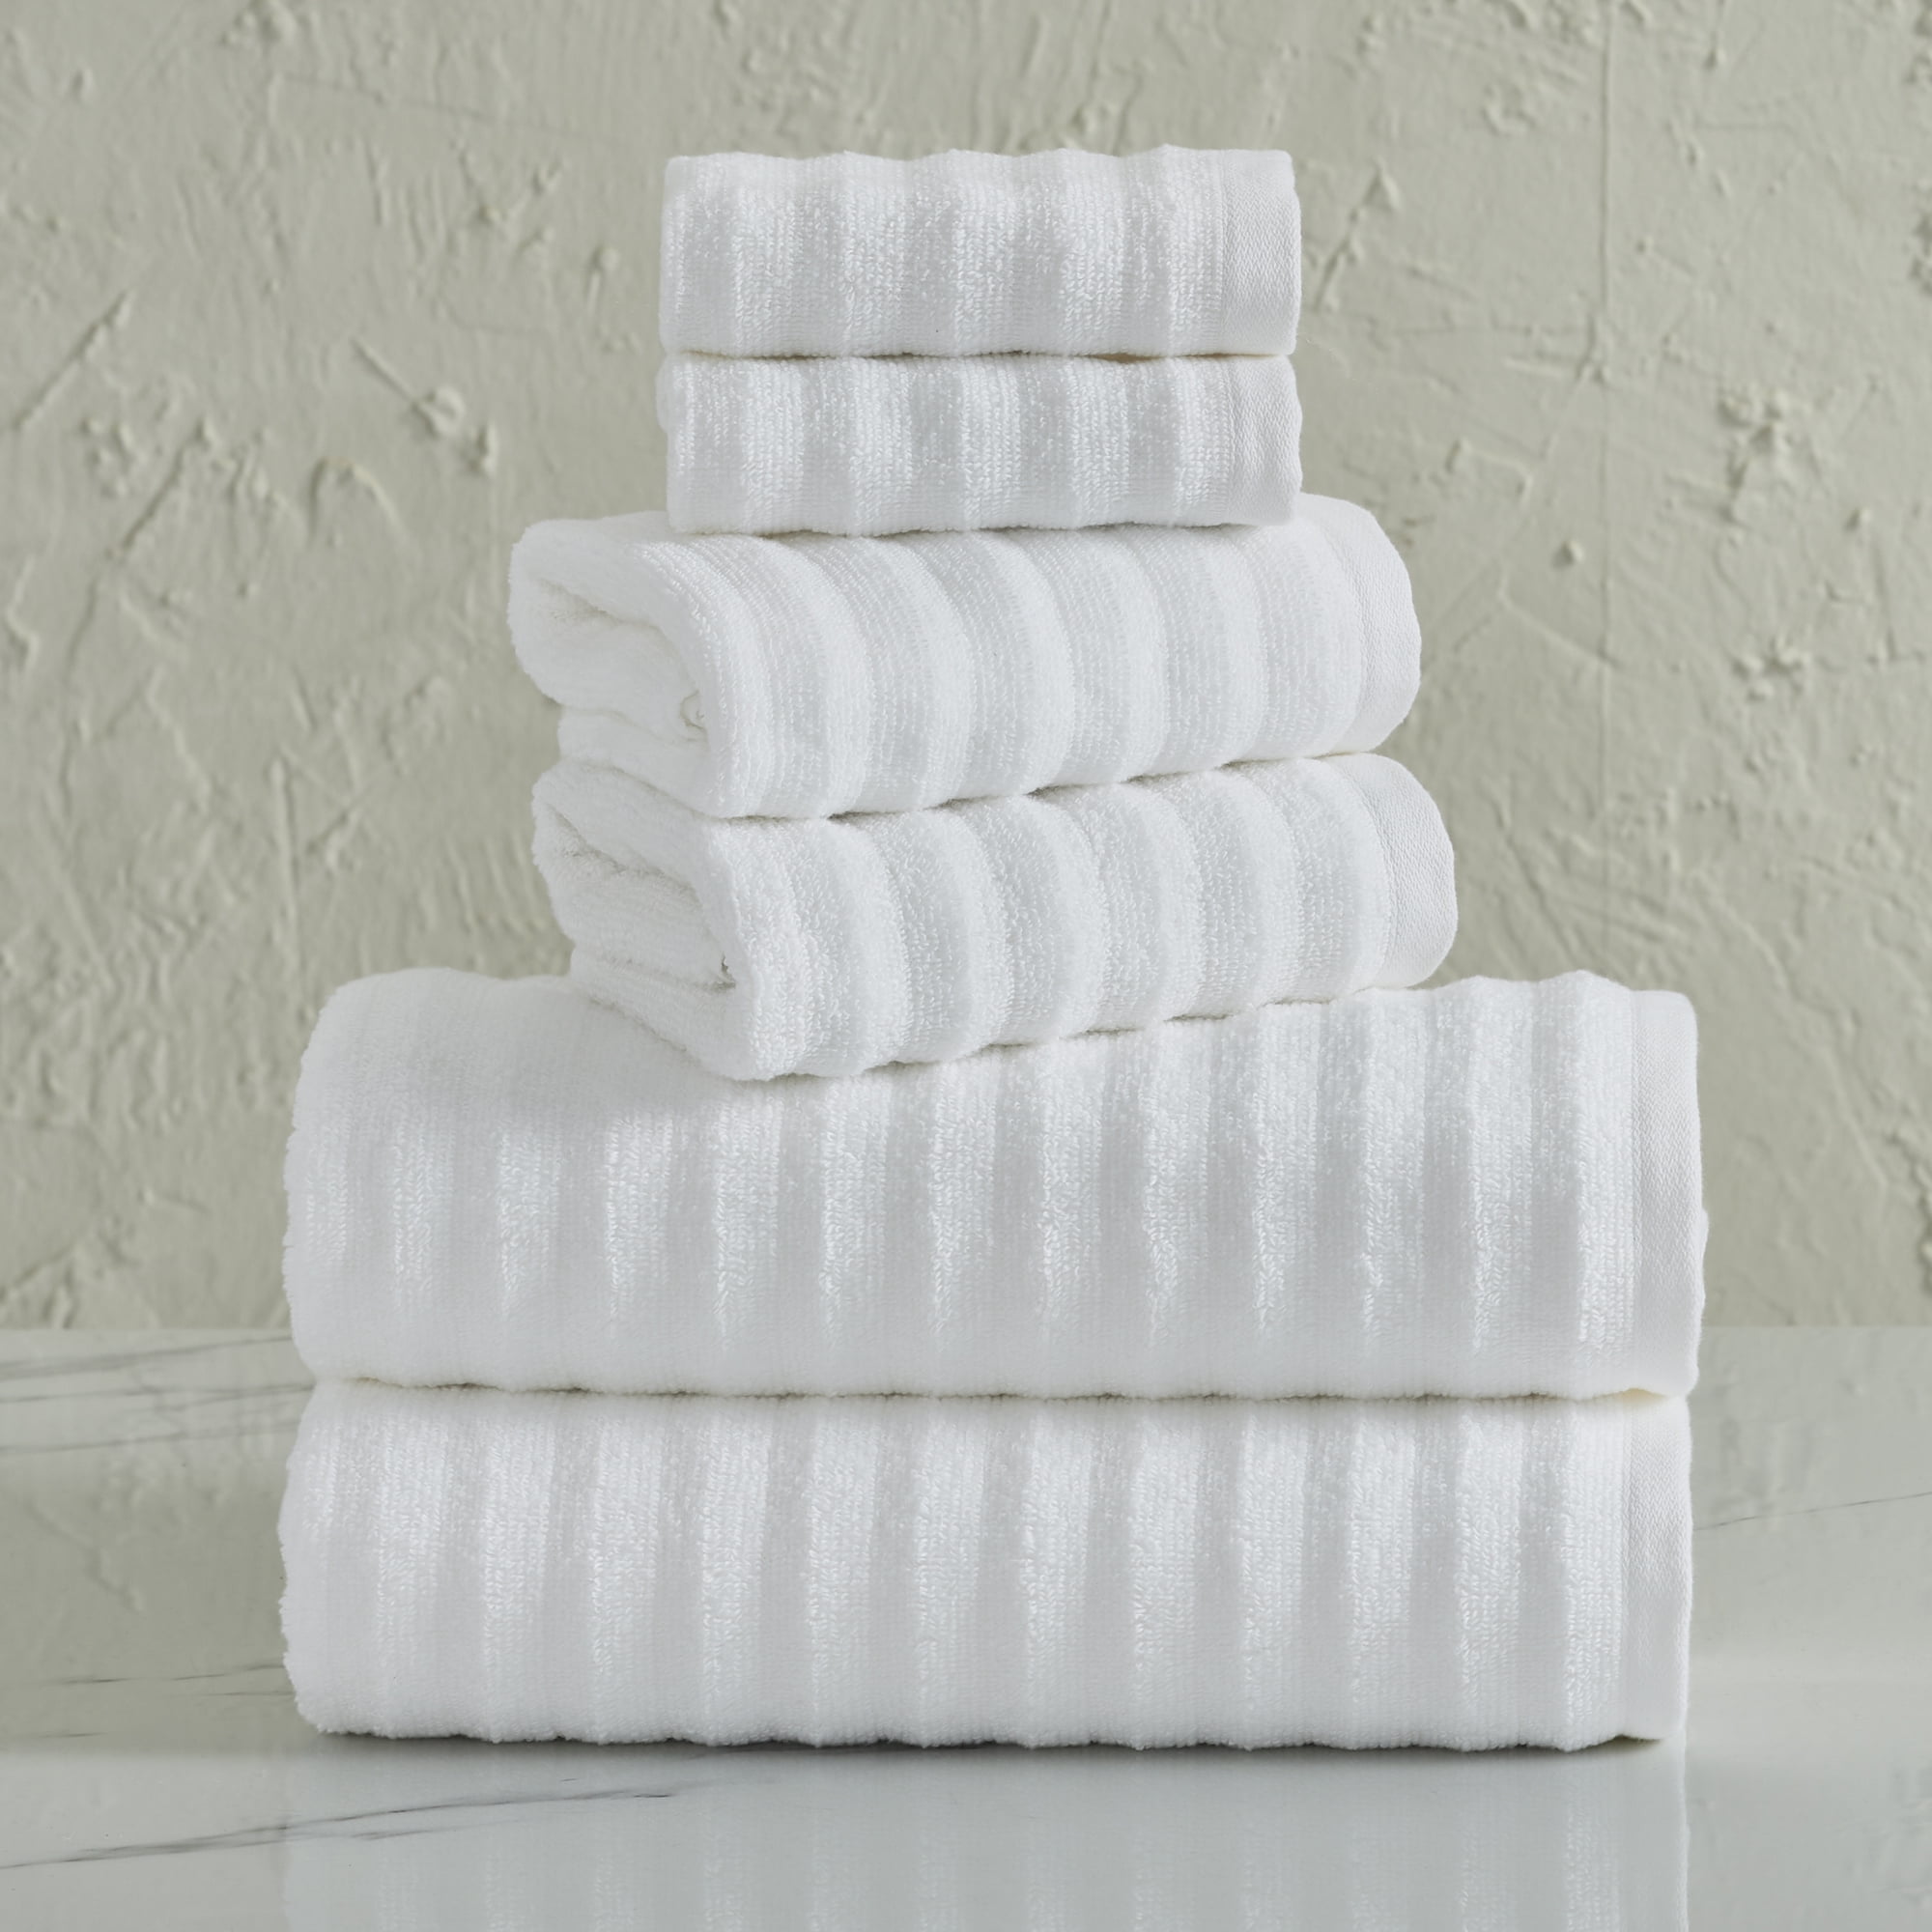  Towels N More 6 Pcs White Absorbent Gym Towels -100